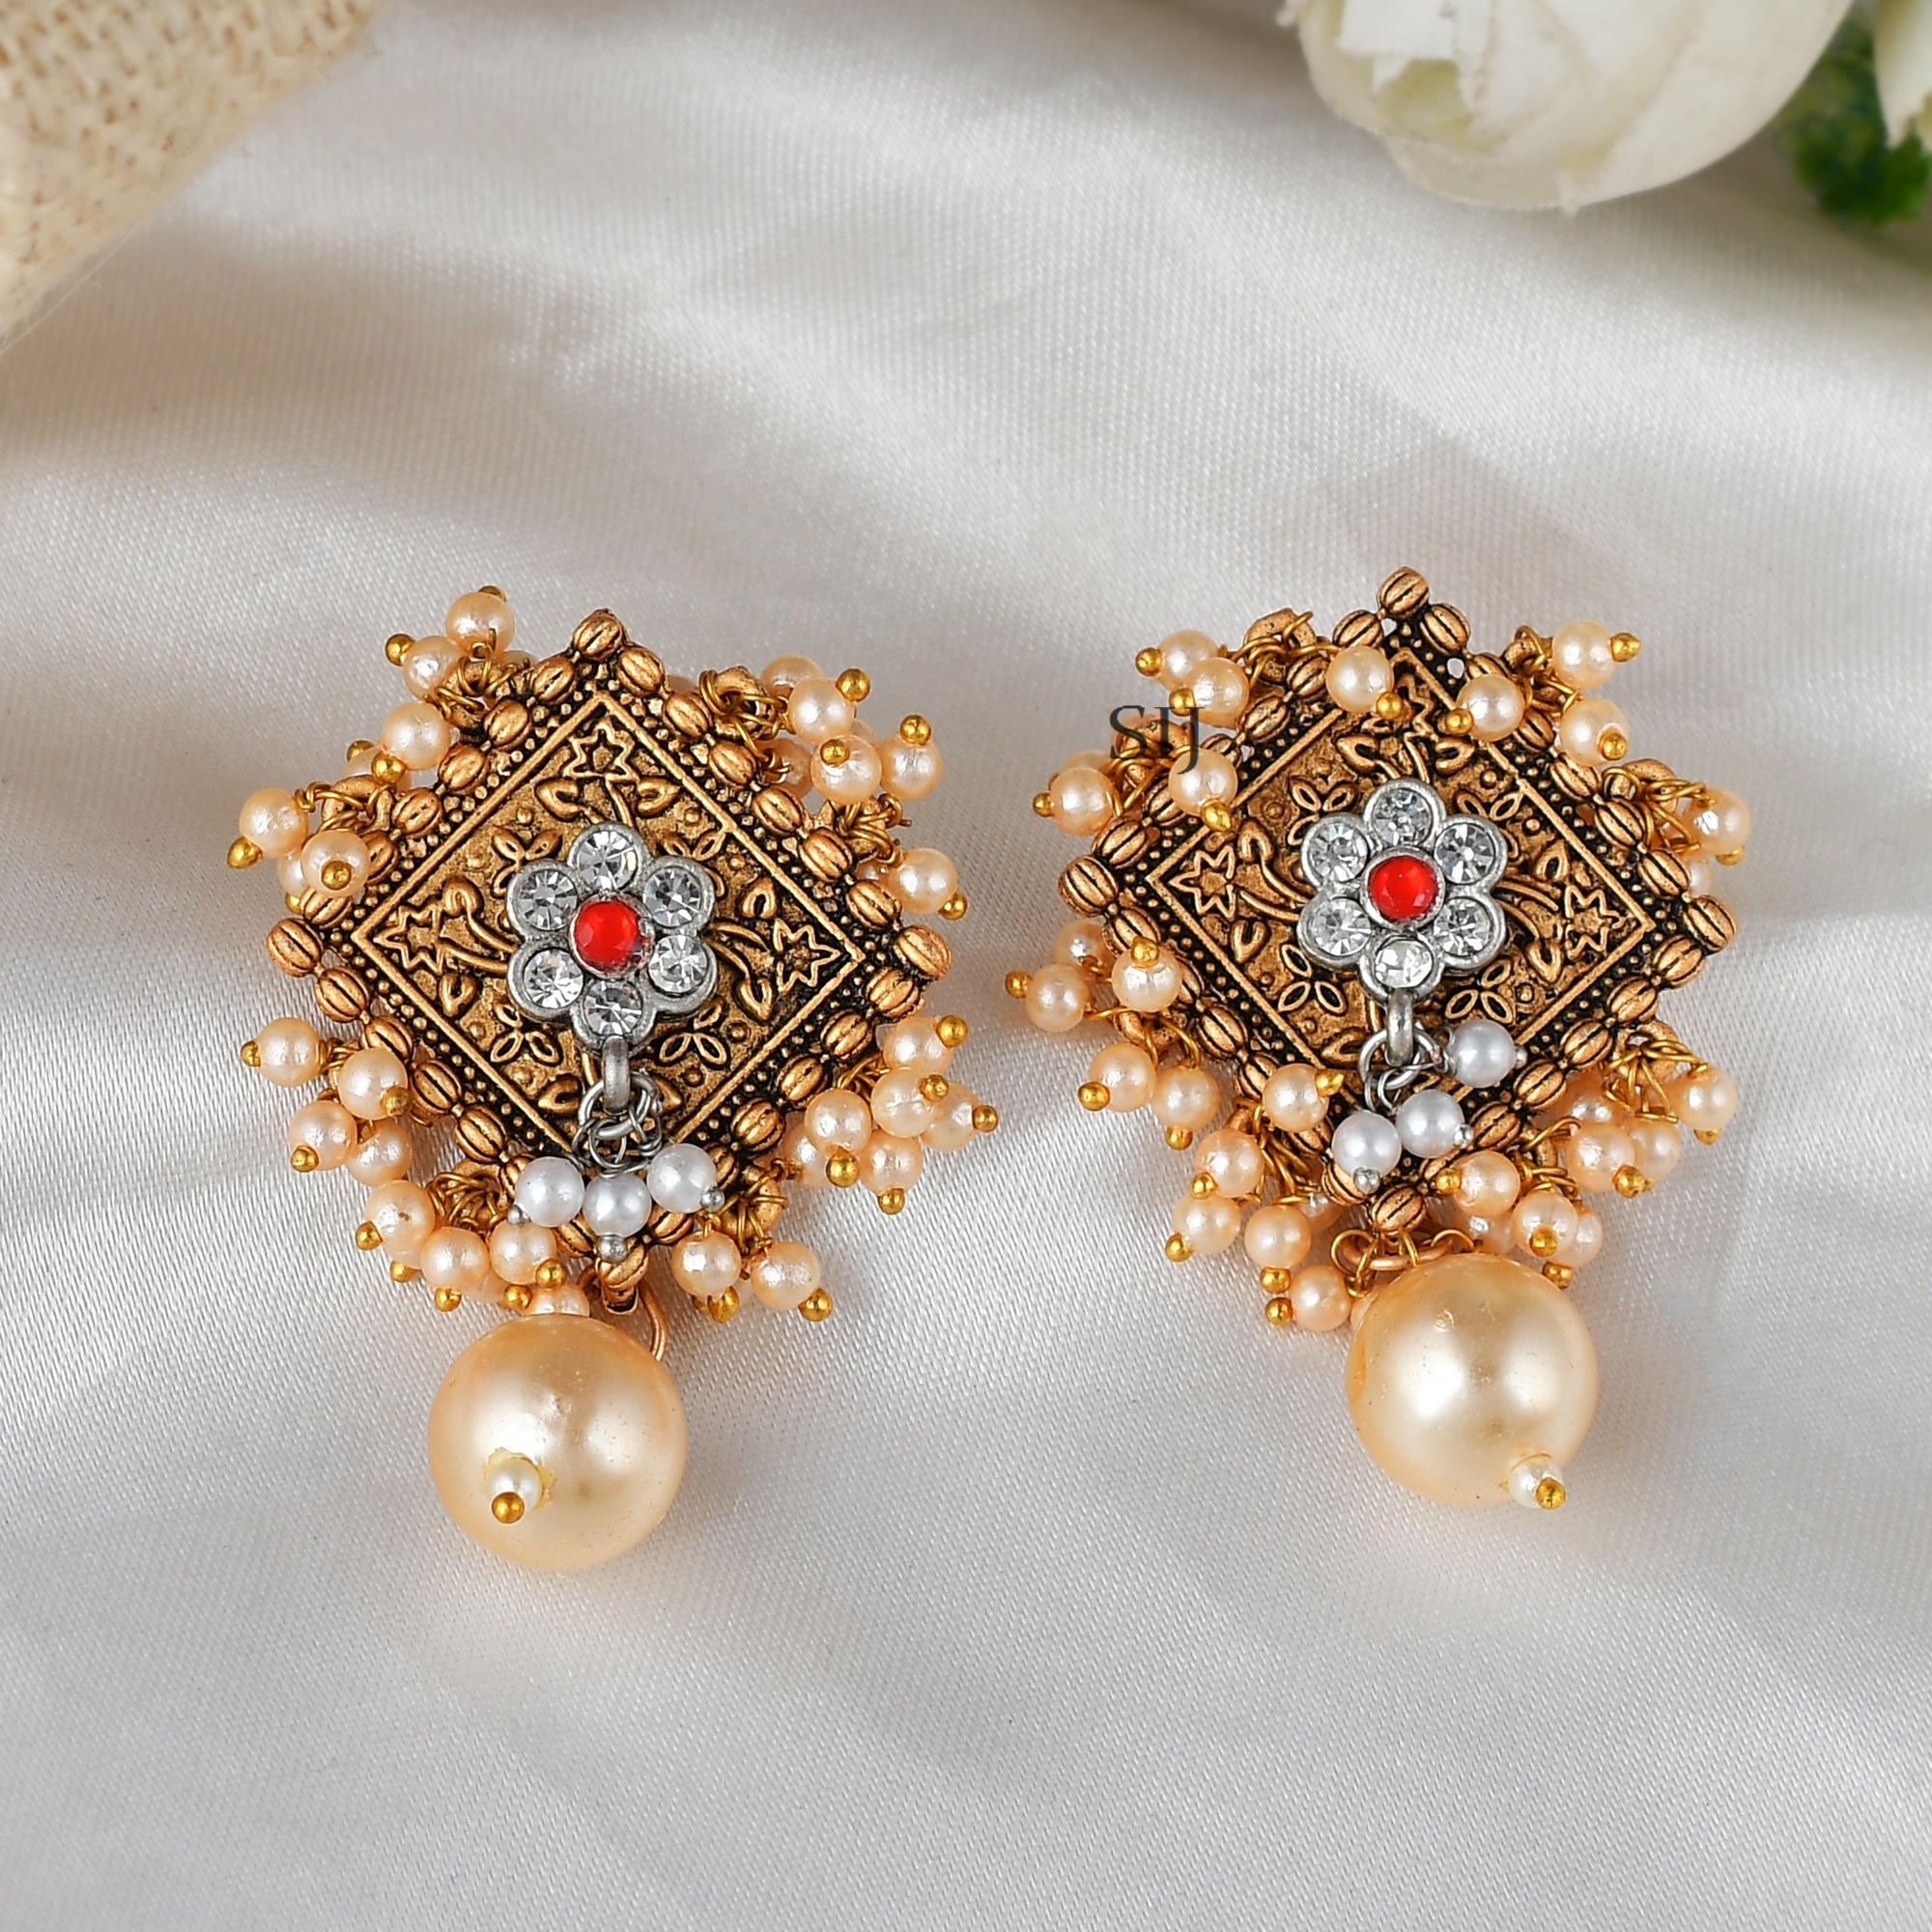 Antique Gold Plated Stones studs Earrings